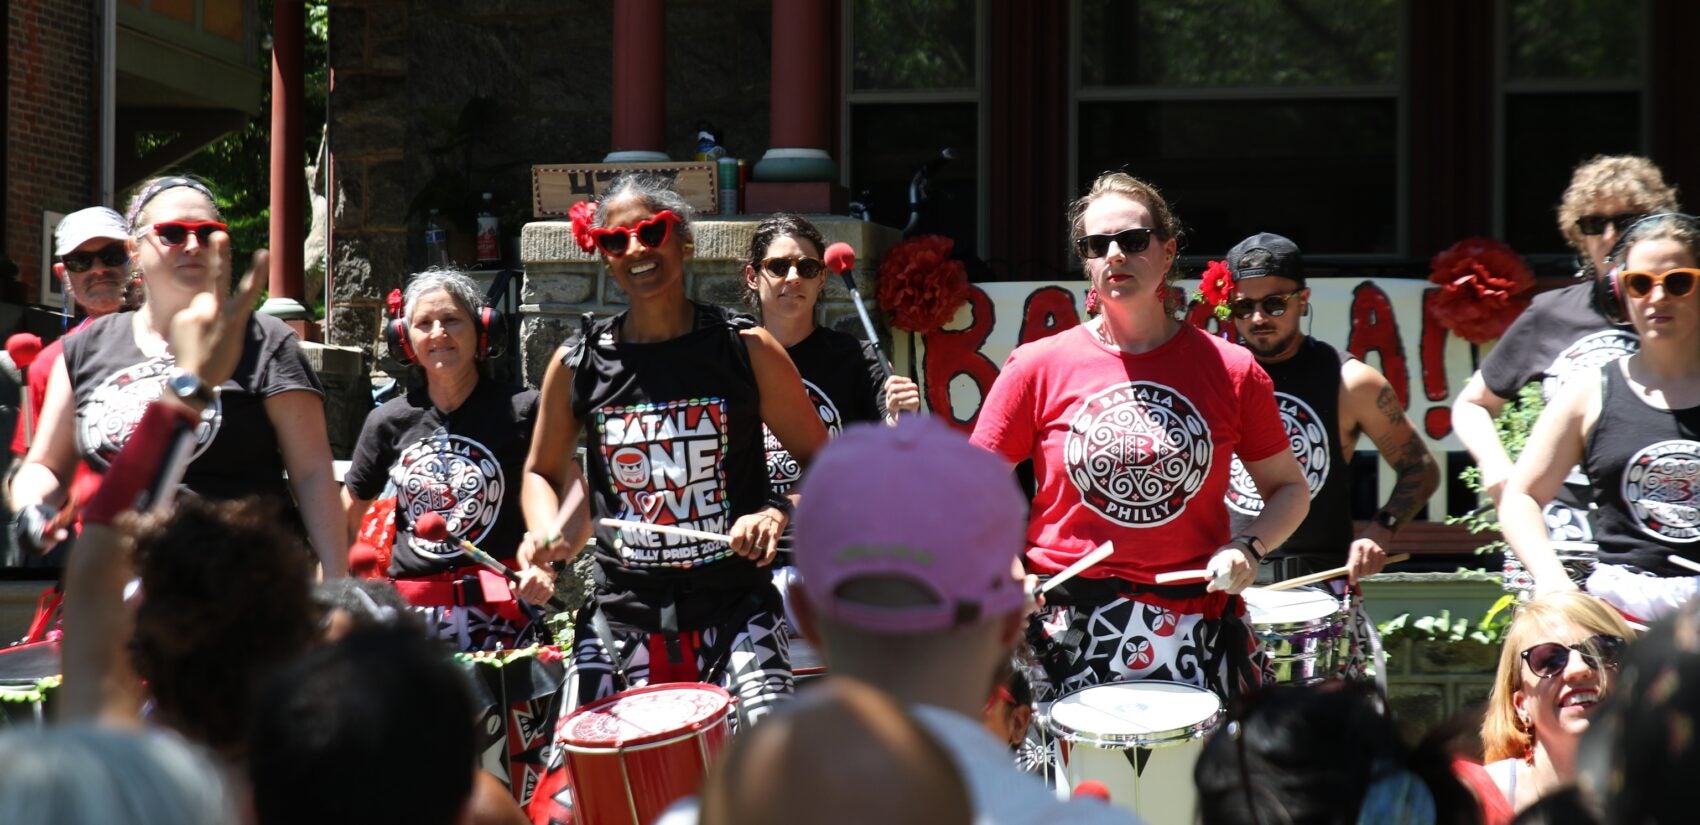 Batala Philly playing drums